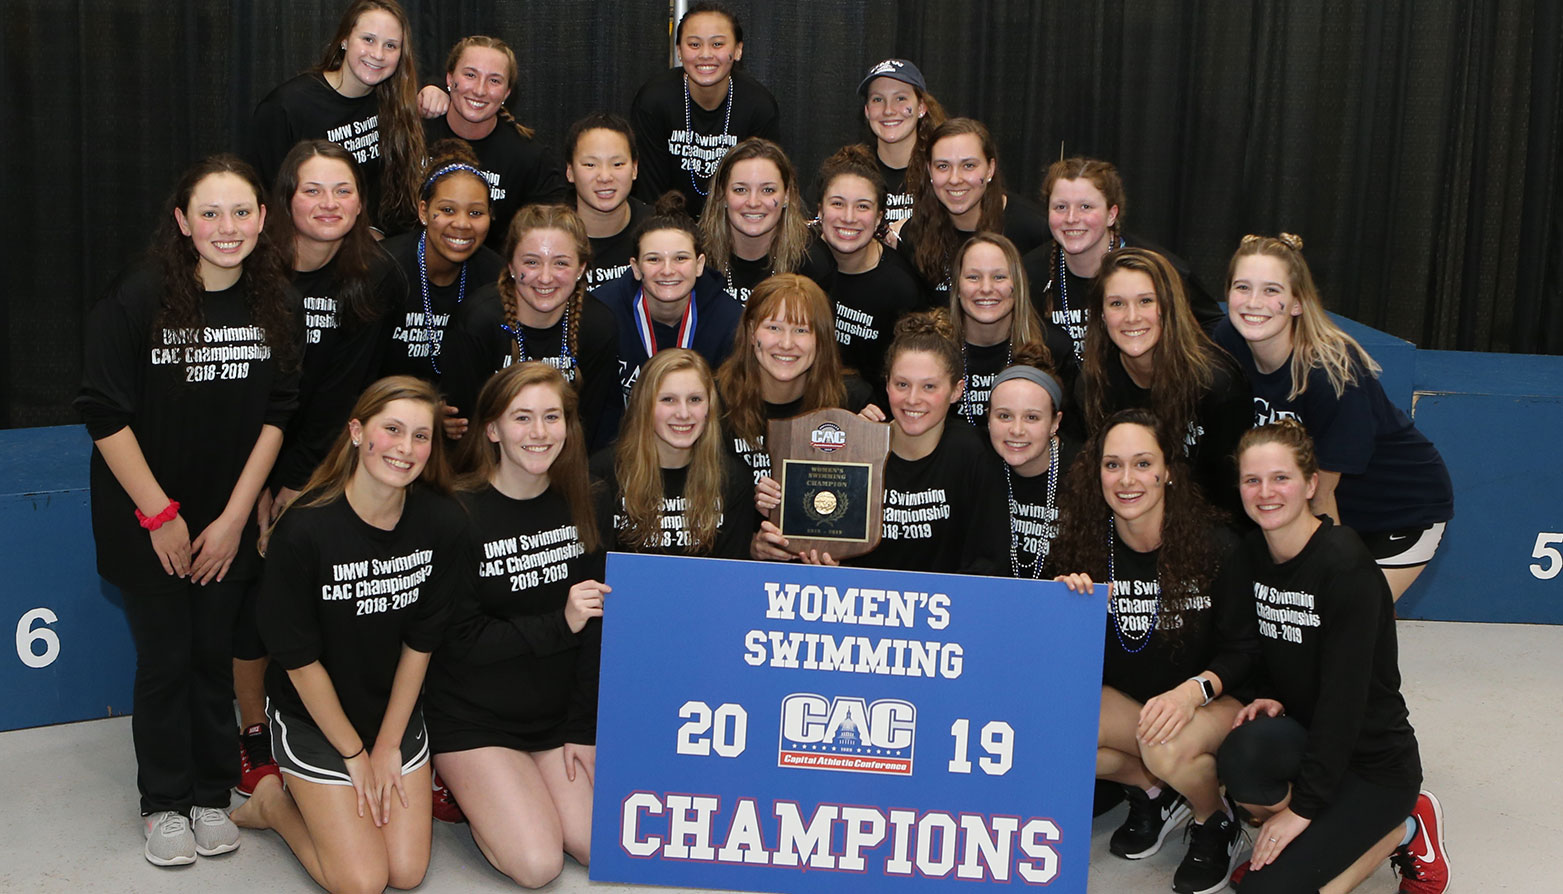 Mary Washington Unanimously Picked to Win 30th Straight CAC Women's Swimming Championship